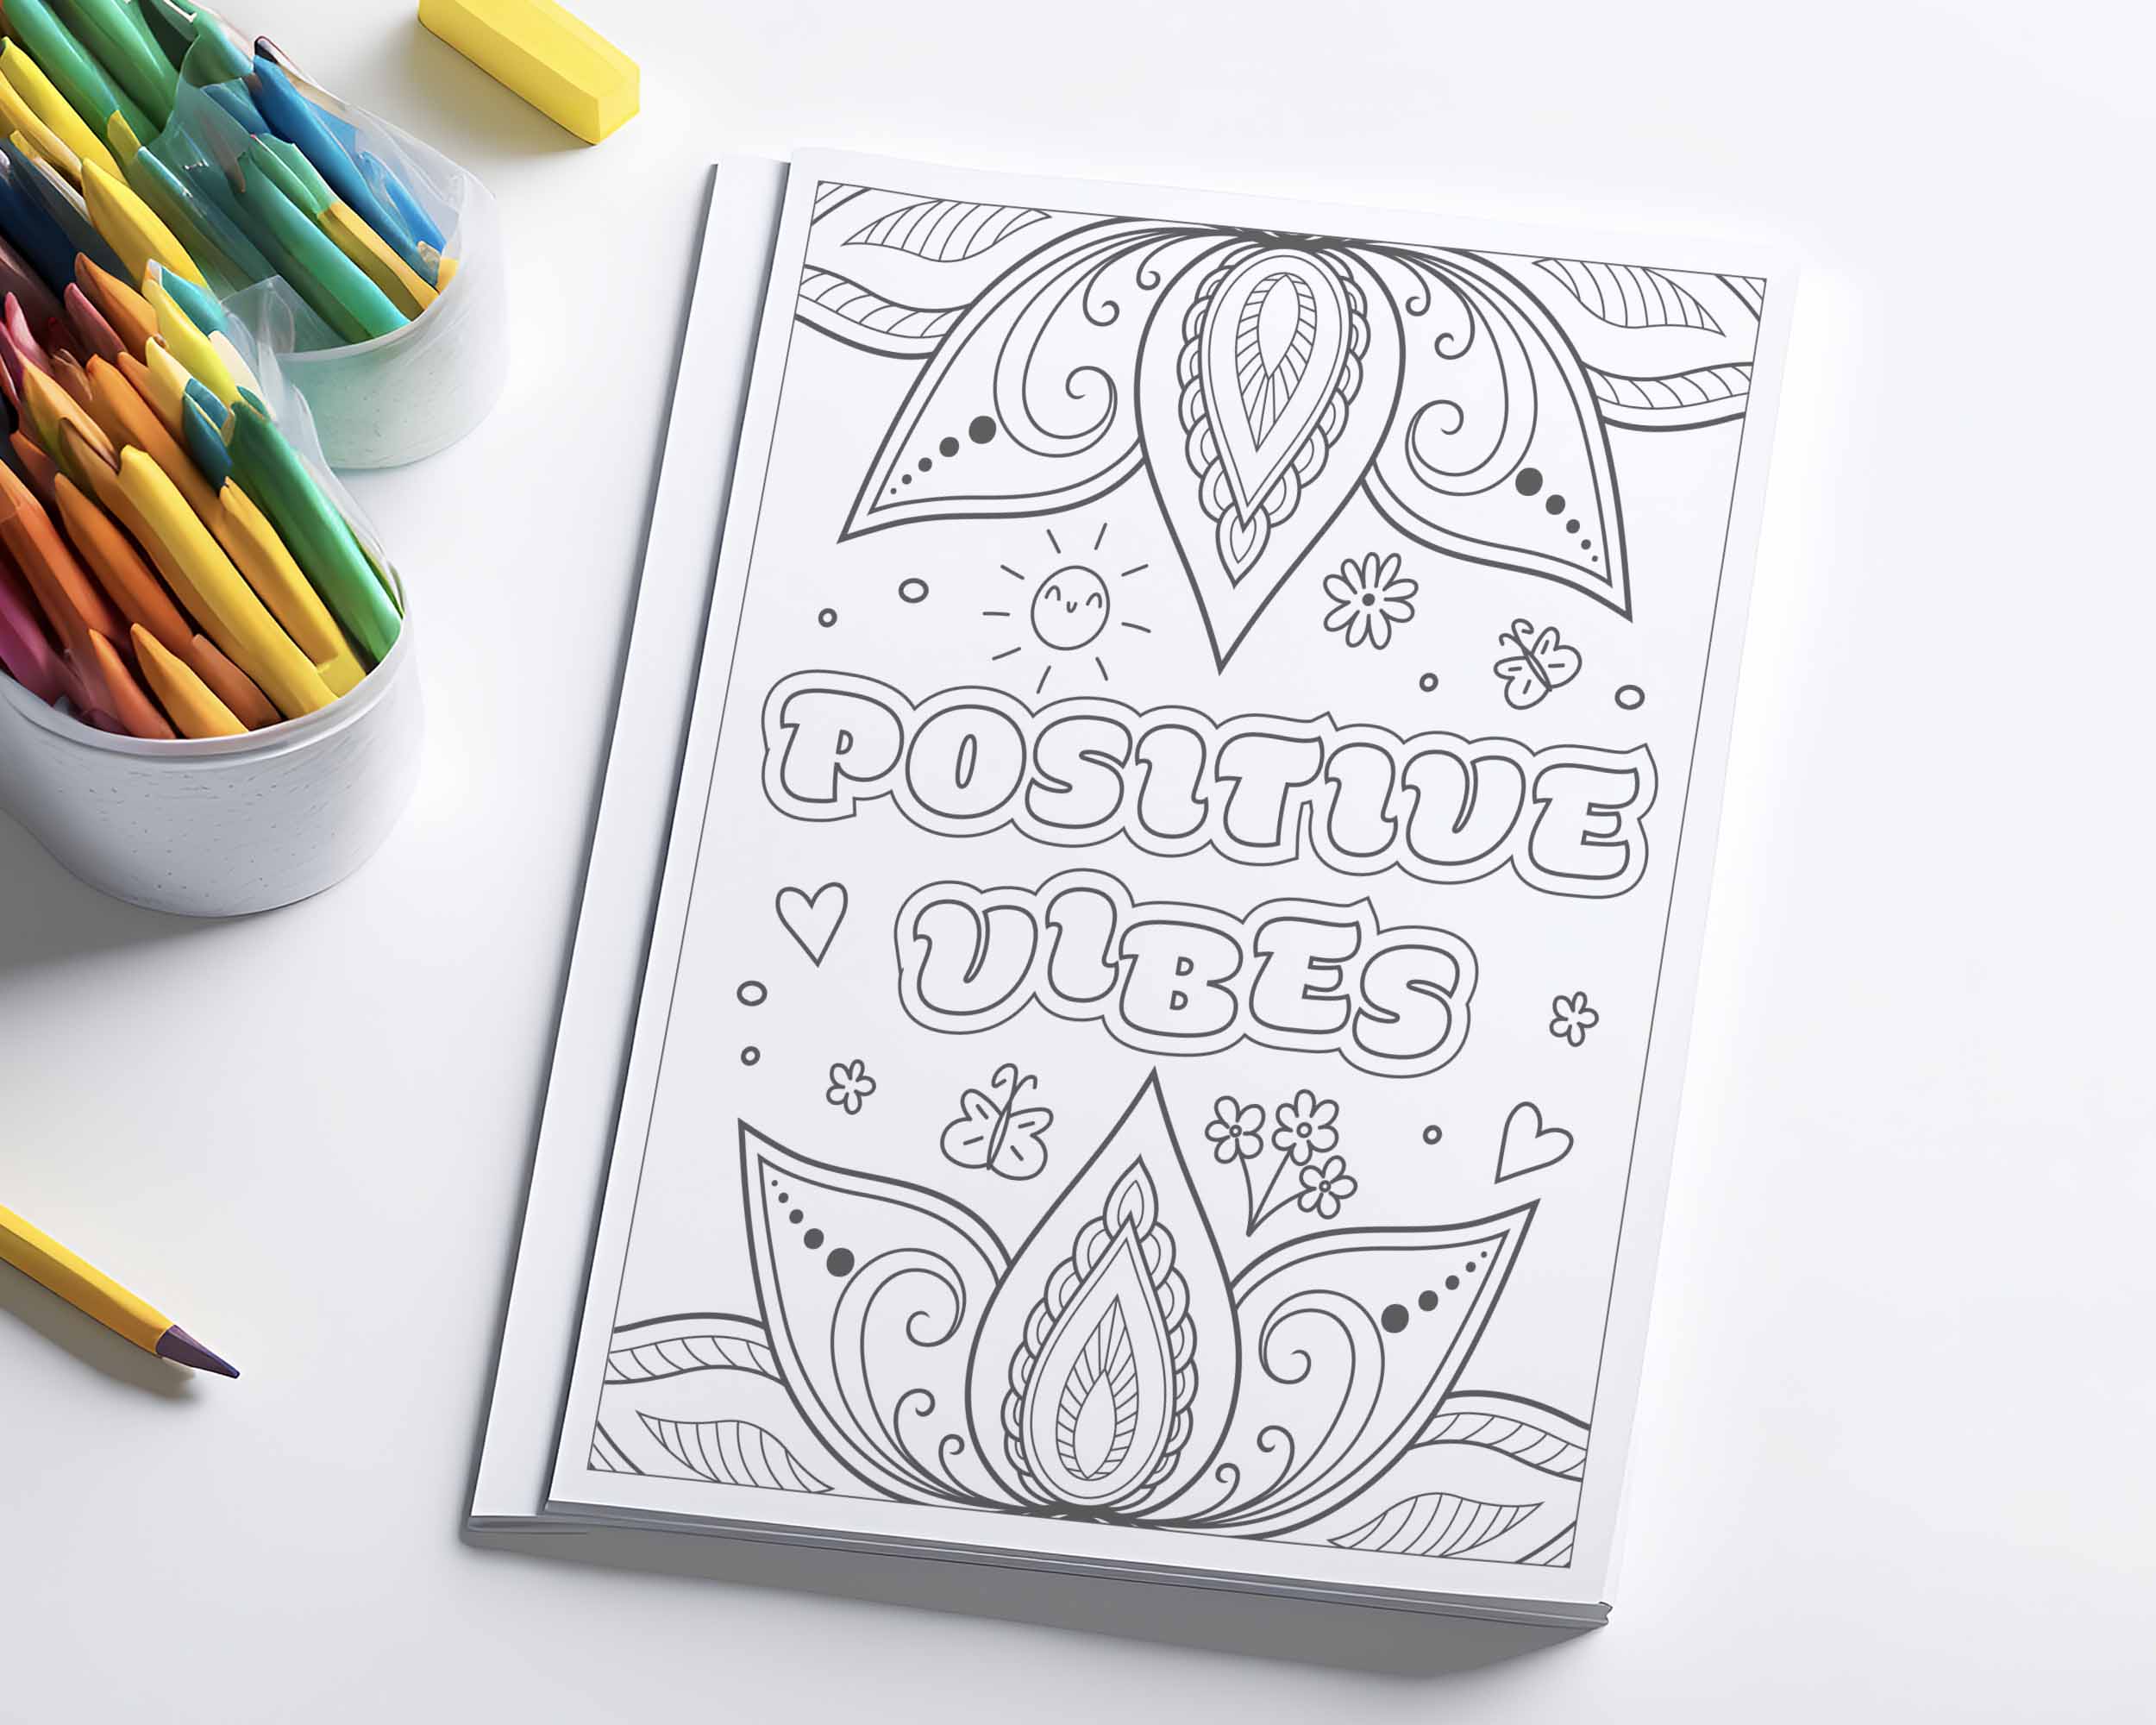 Printable anxiety relief coloring sheet.